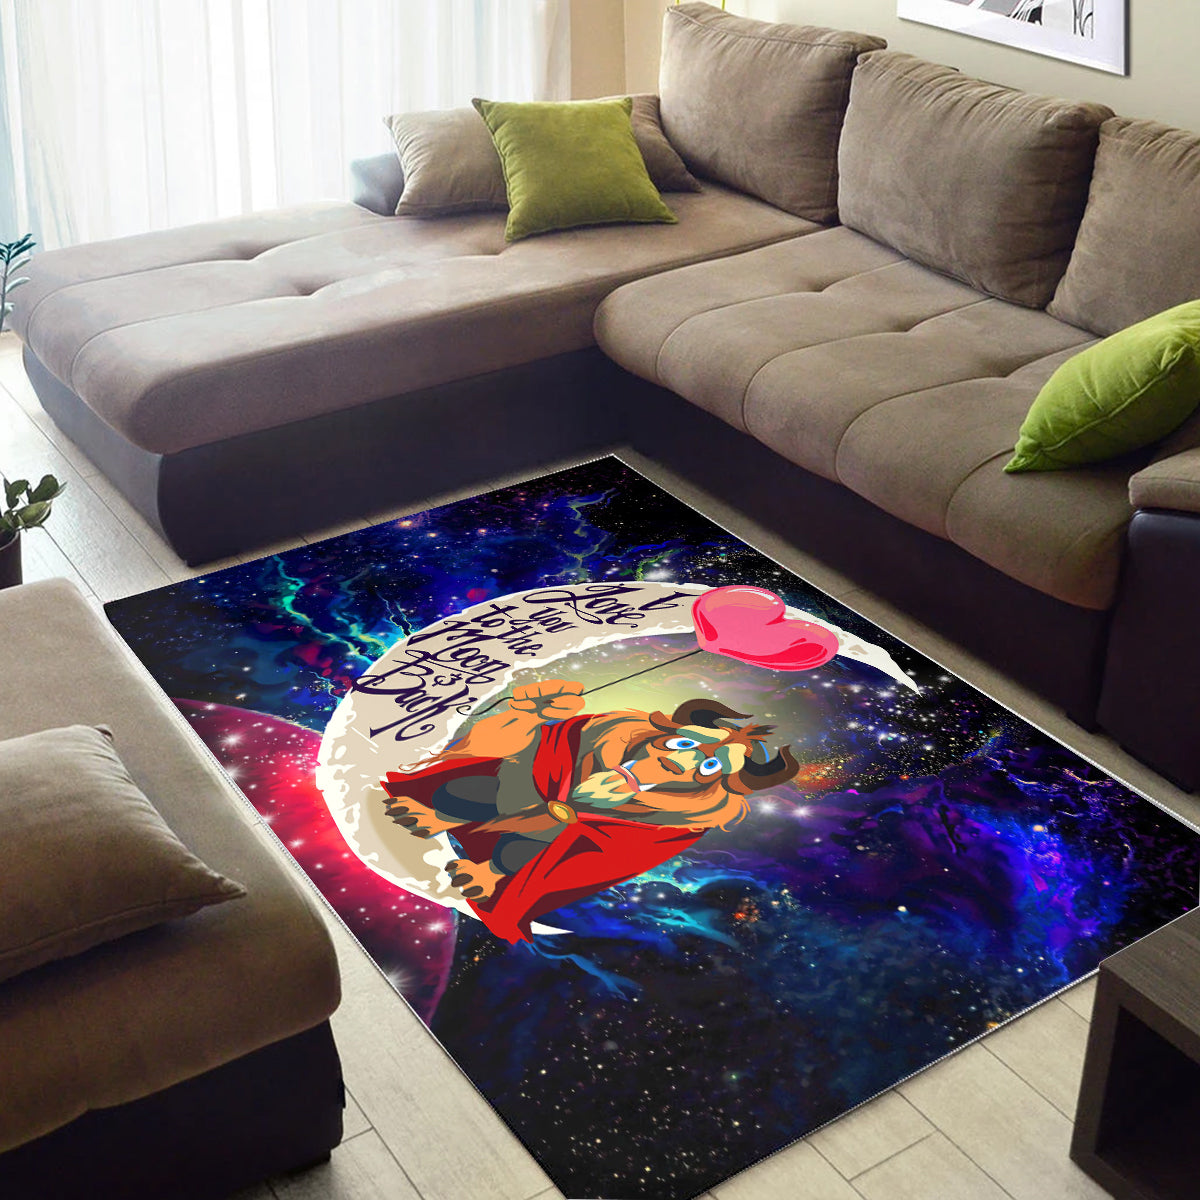 Beauty And The Beast Love You To The Moon Galaxy Carpet Rug Home Room Decor